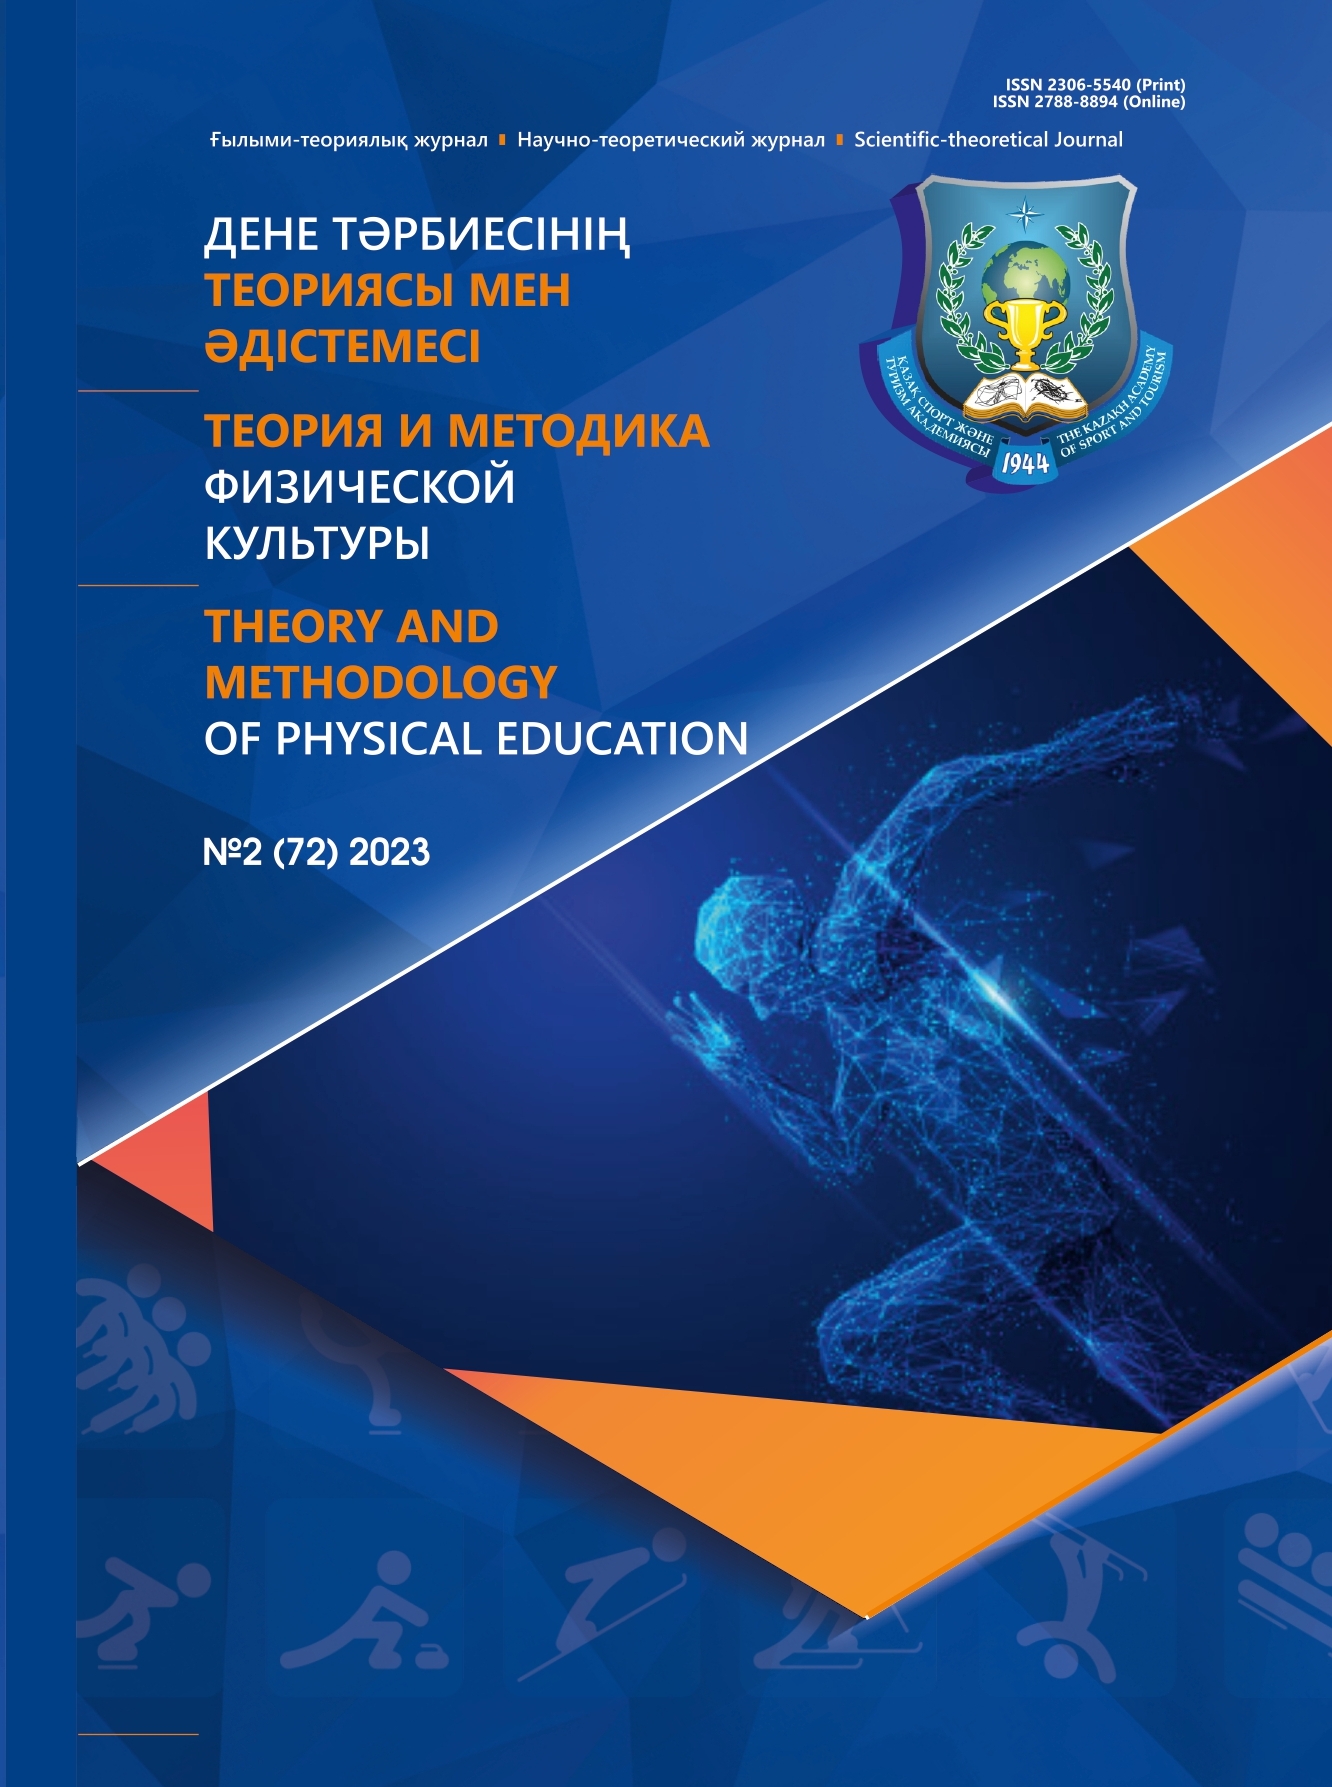 					View Vol. 72 No. 2 (2023): THEORY AND METHODOLOGY OF PHYSICAL EDUCATION
				